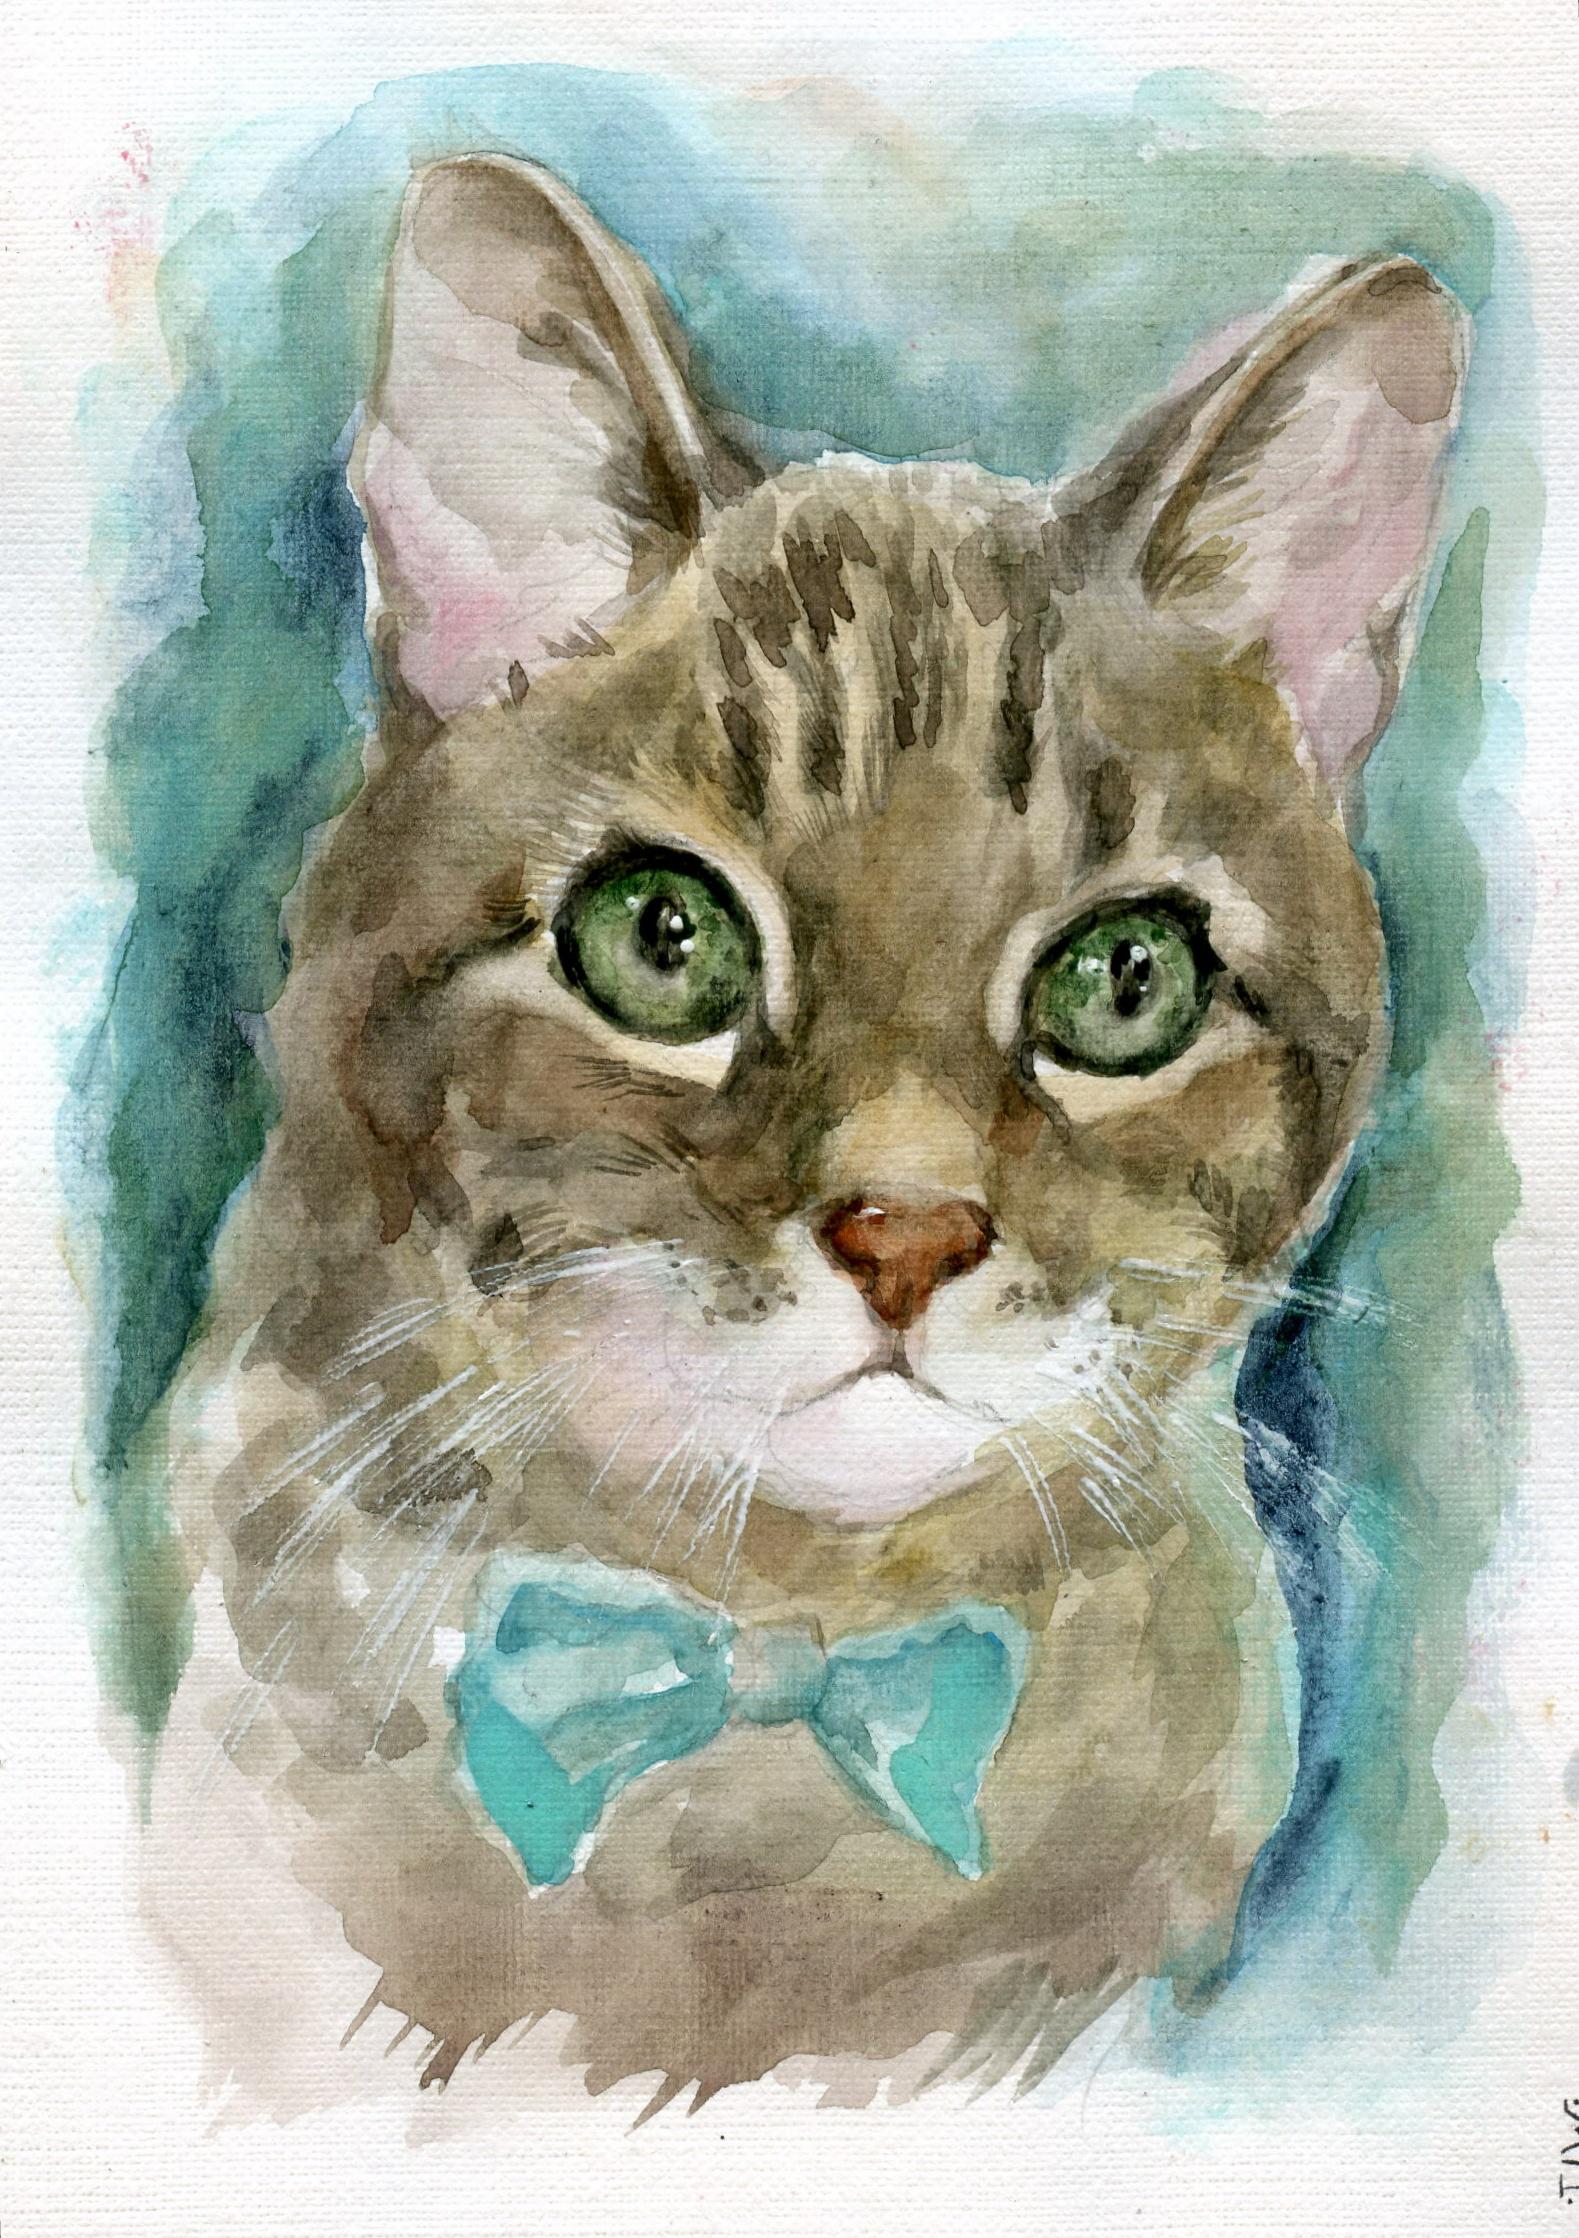 A memorial portrait of cute Chip. Painted on paper with watercolor and love.